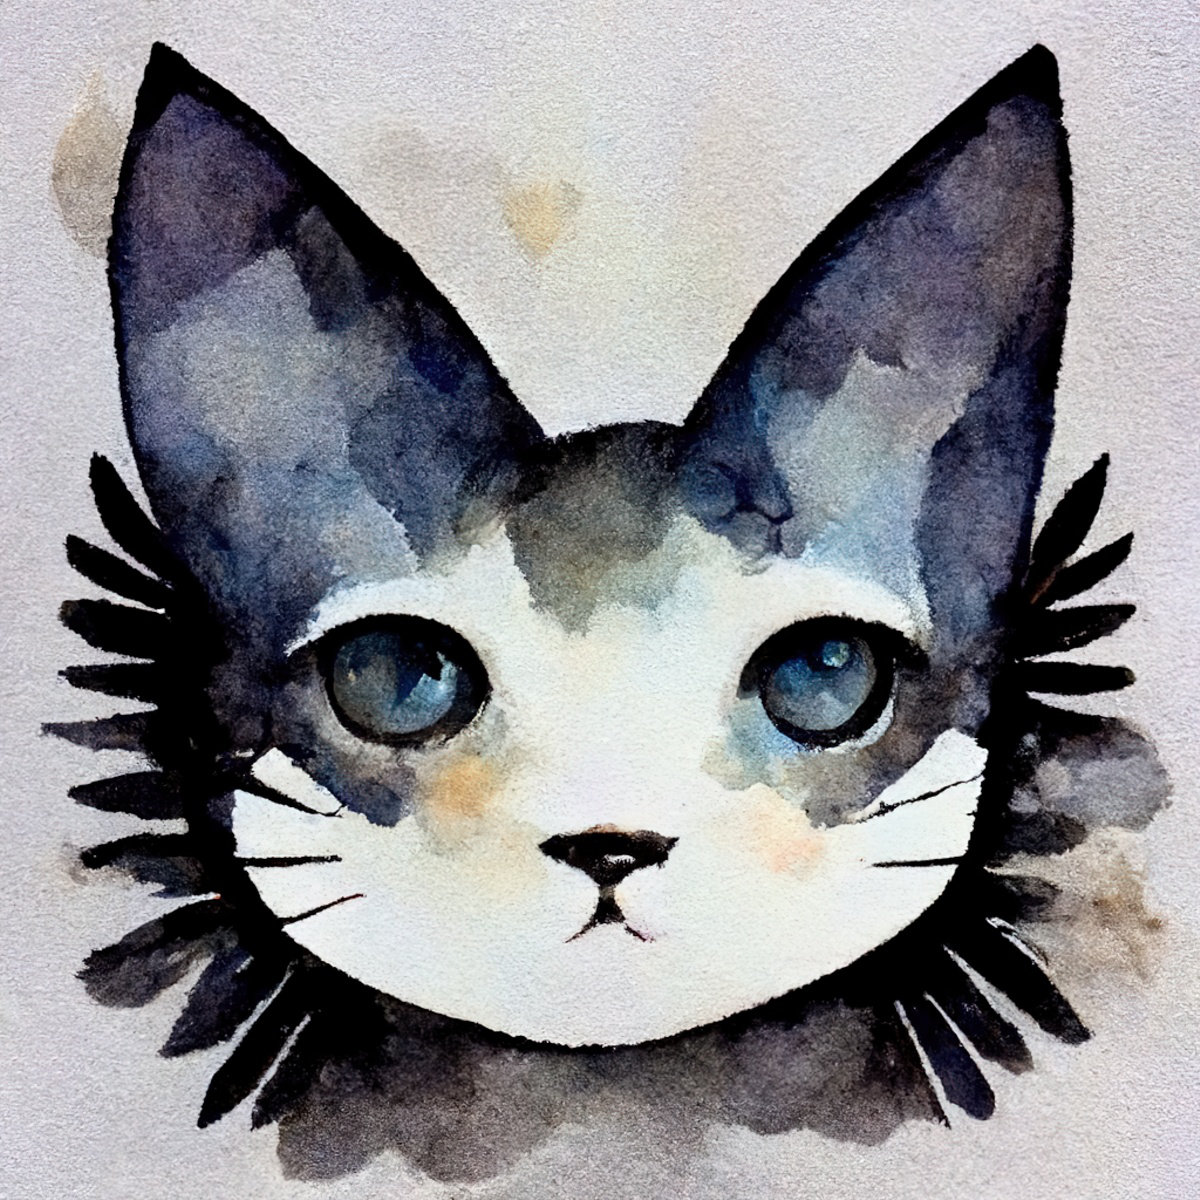 Inky Illustrations of Cats